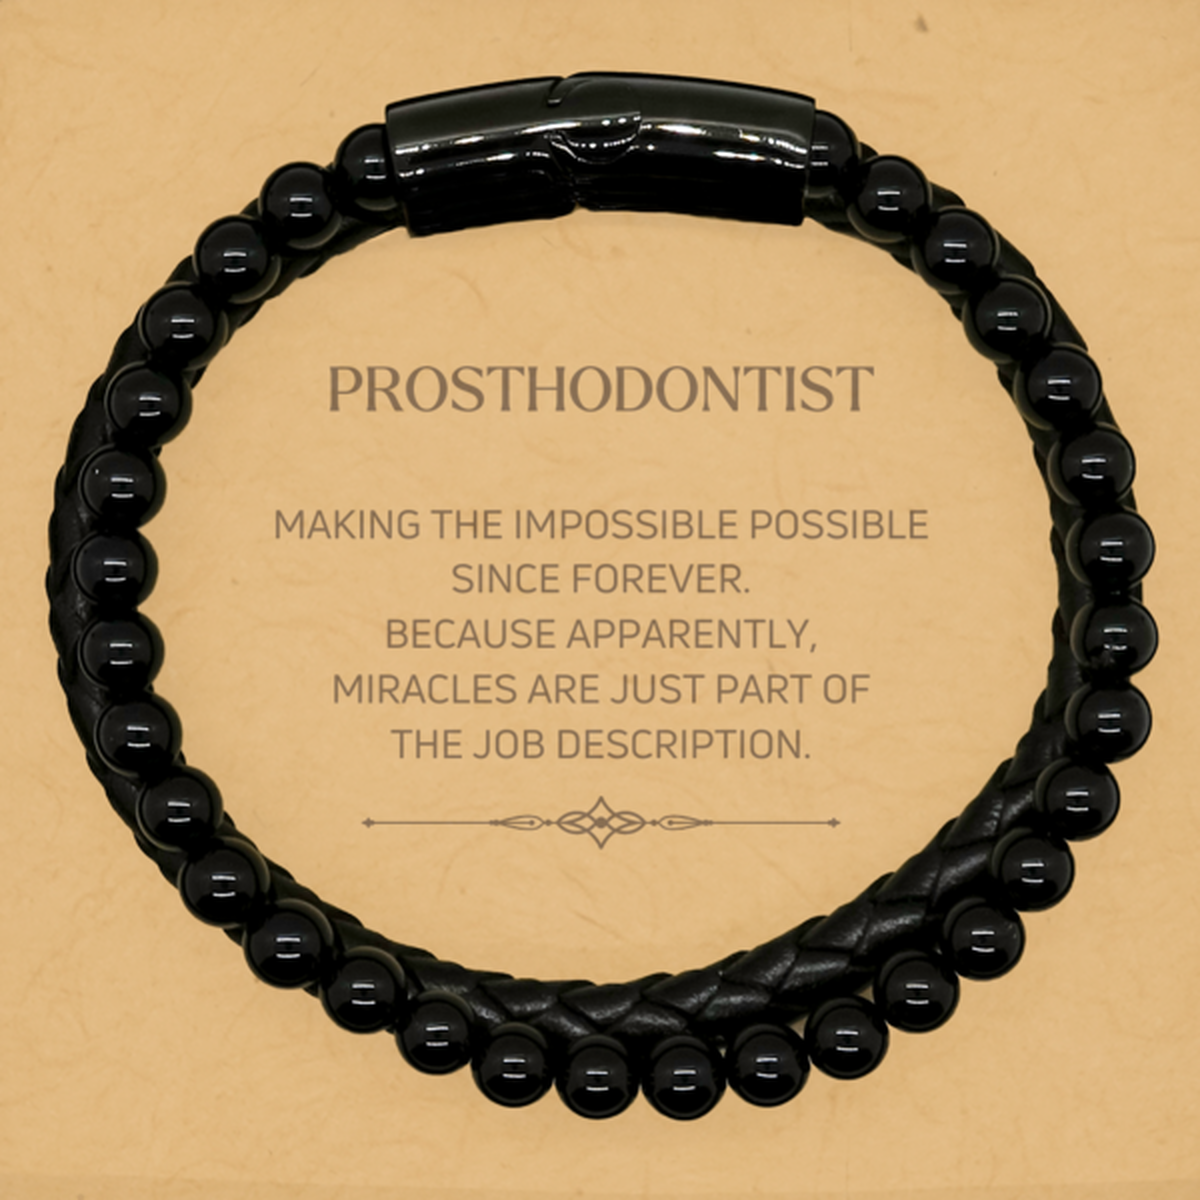 Funny Prosthodontist Gifts, Miracles are just part of the job description, Inspirational Birthday Stone Leather Bracelets For Prosthodontist, Men, Women, Coworkers, Friends, Boss